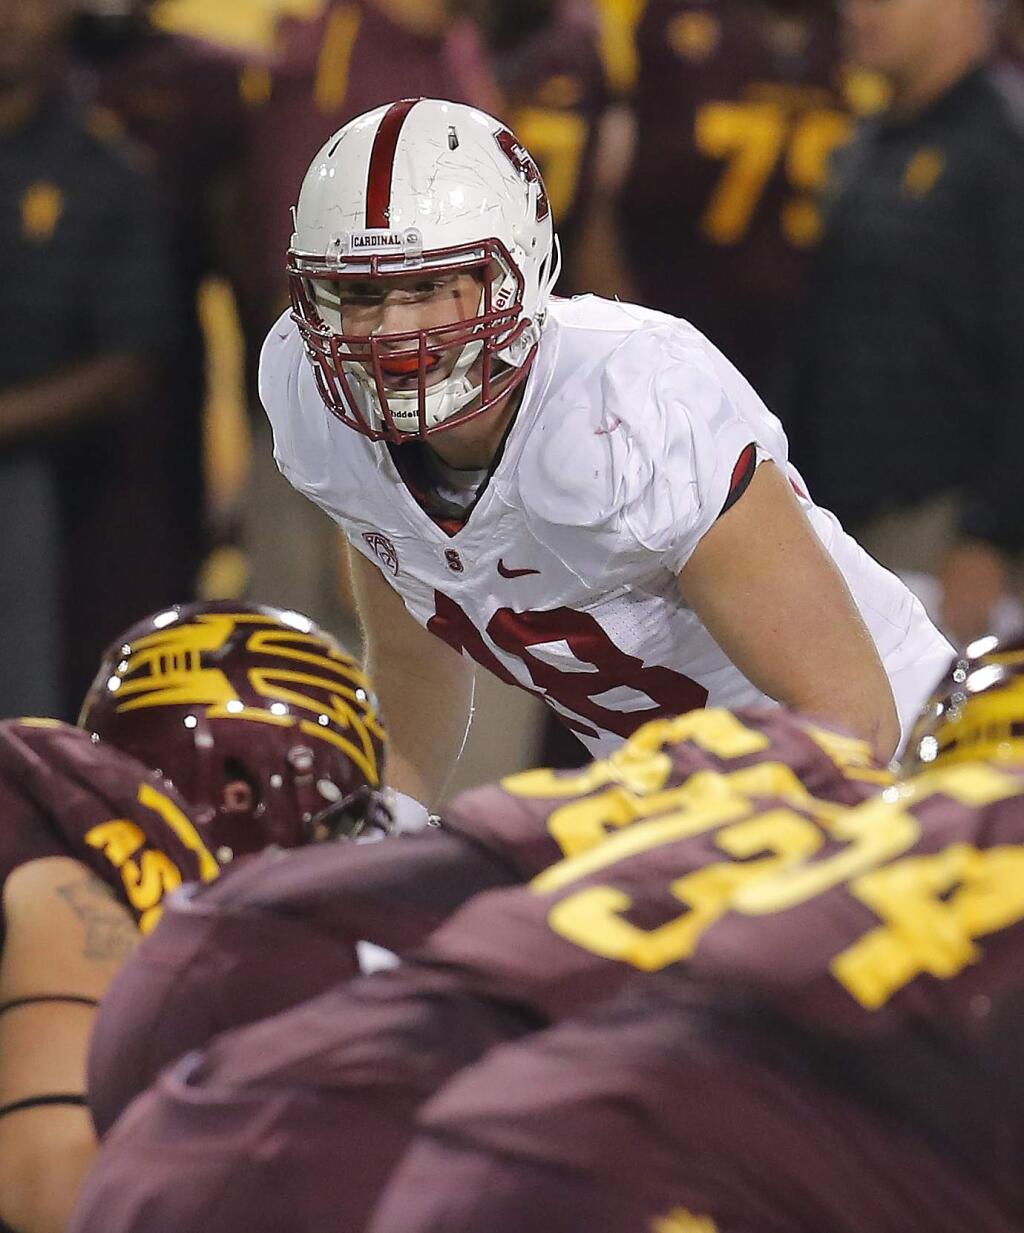 FILE - In this Oct. 18, 2014, file photo, Stanford linebacker Kevin Anderson (48) lines up during the second half of the NCAA college football game against Arizona State in Tempe, Ariz. After a down season a year ago, Stanford hopes to get back to the top of the Pac-12. (AP Photo/Rick Scuteri, File)